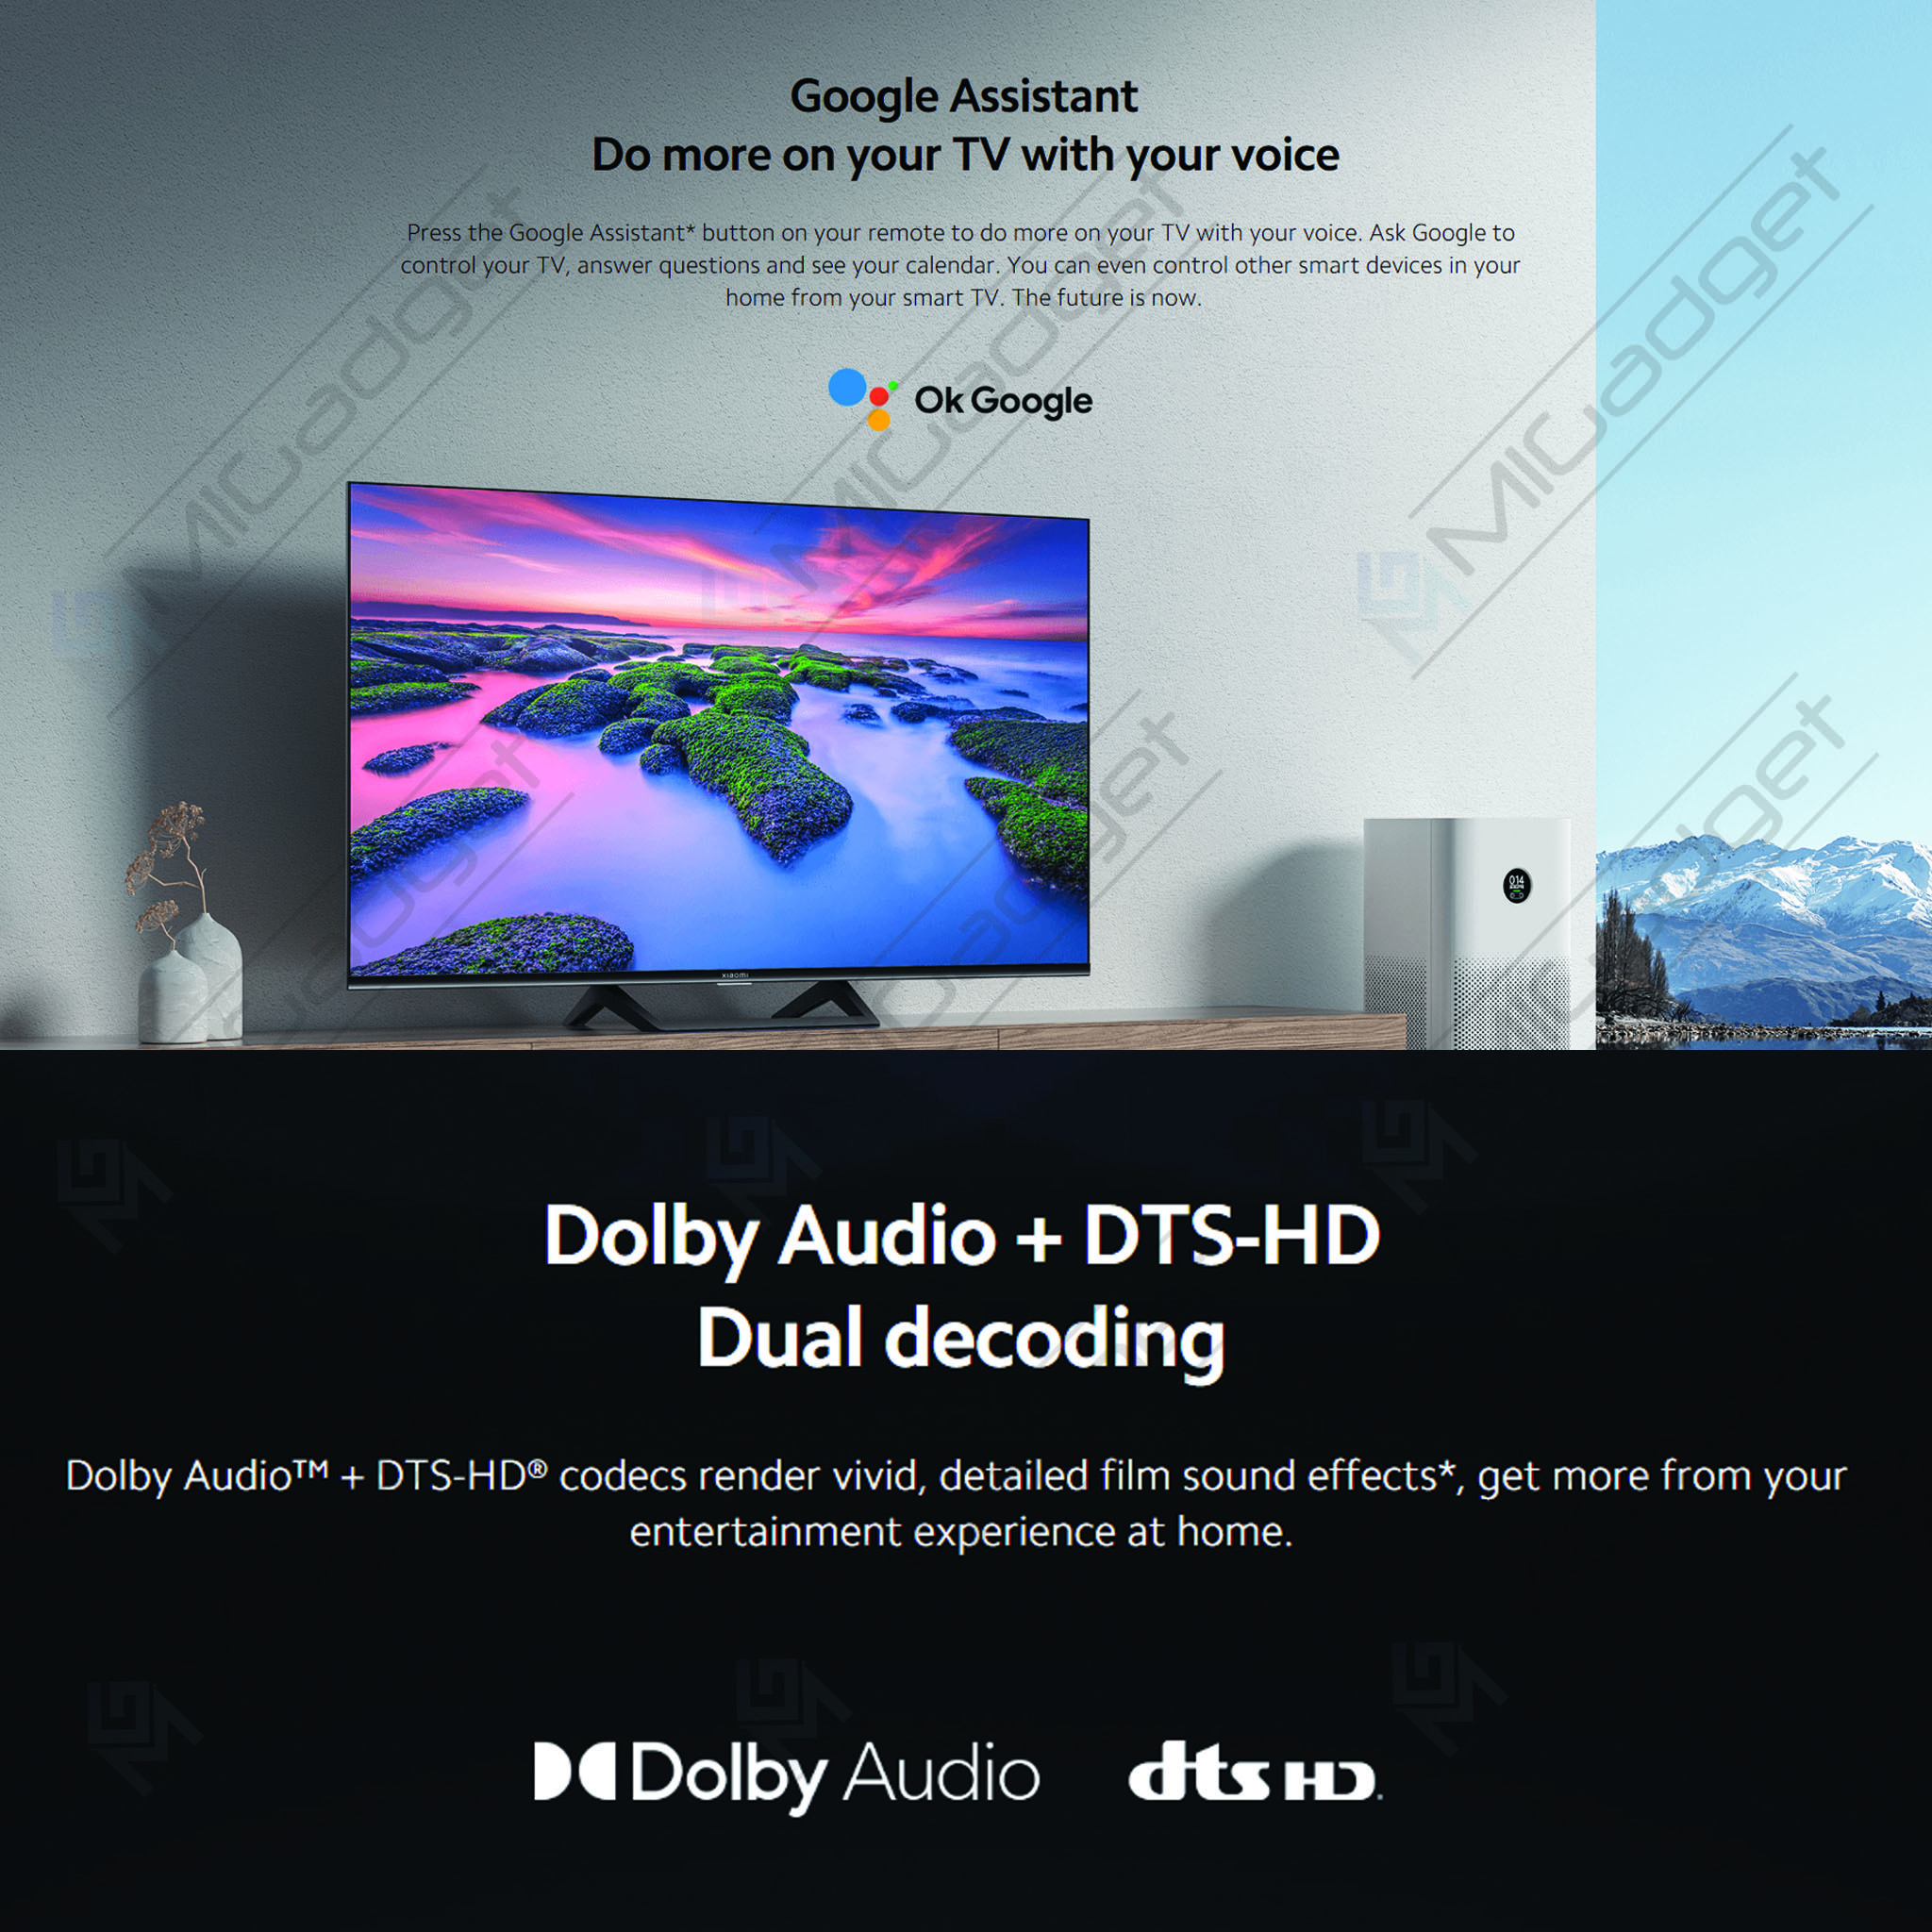 TV LED 80 cm (32) Xiaomi A2, HD, Android Smart TV con Dolby Video